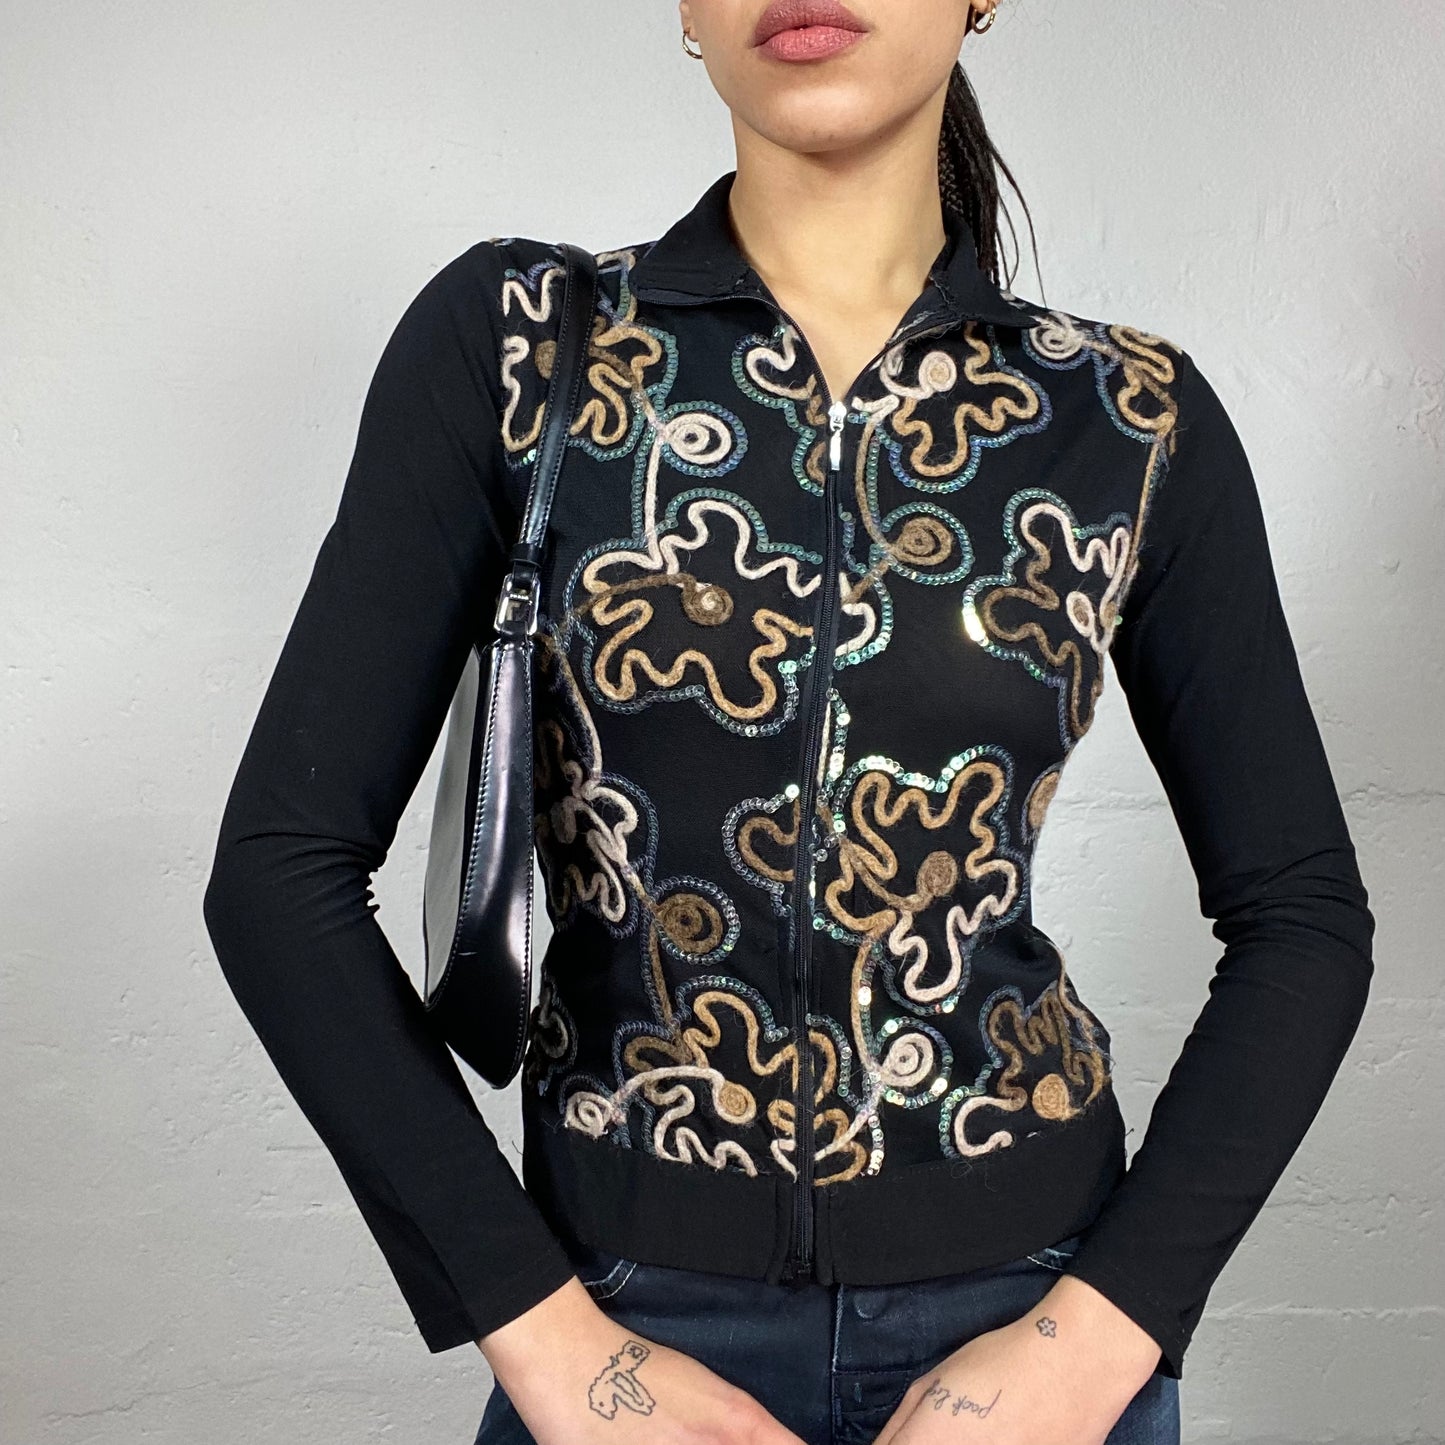 Vintage 2000's Hippie Black Zip Up Sweater with Wool Floral Print with Sequins Detail (S)